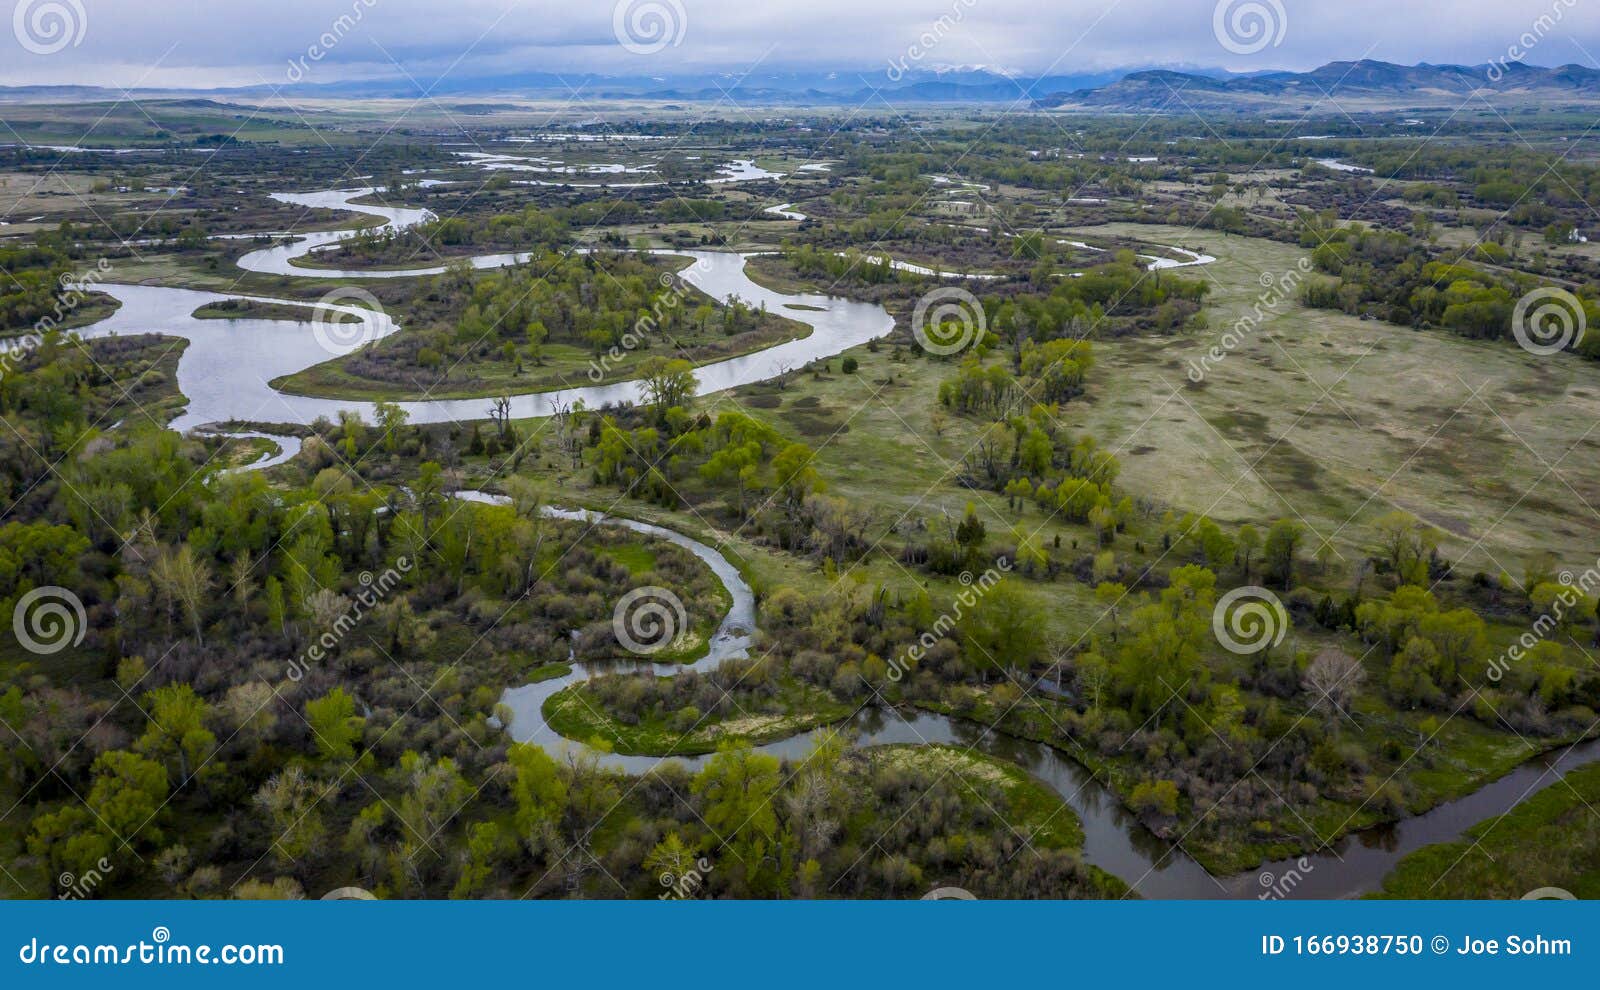 may 23 2019, usa - three forks, mt - missouri river breaks national monument, the source of the missouri river, comprised of jeffe